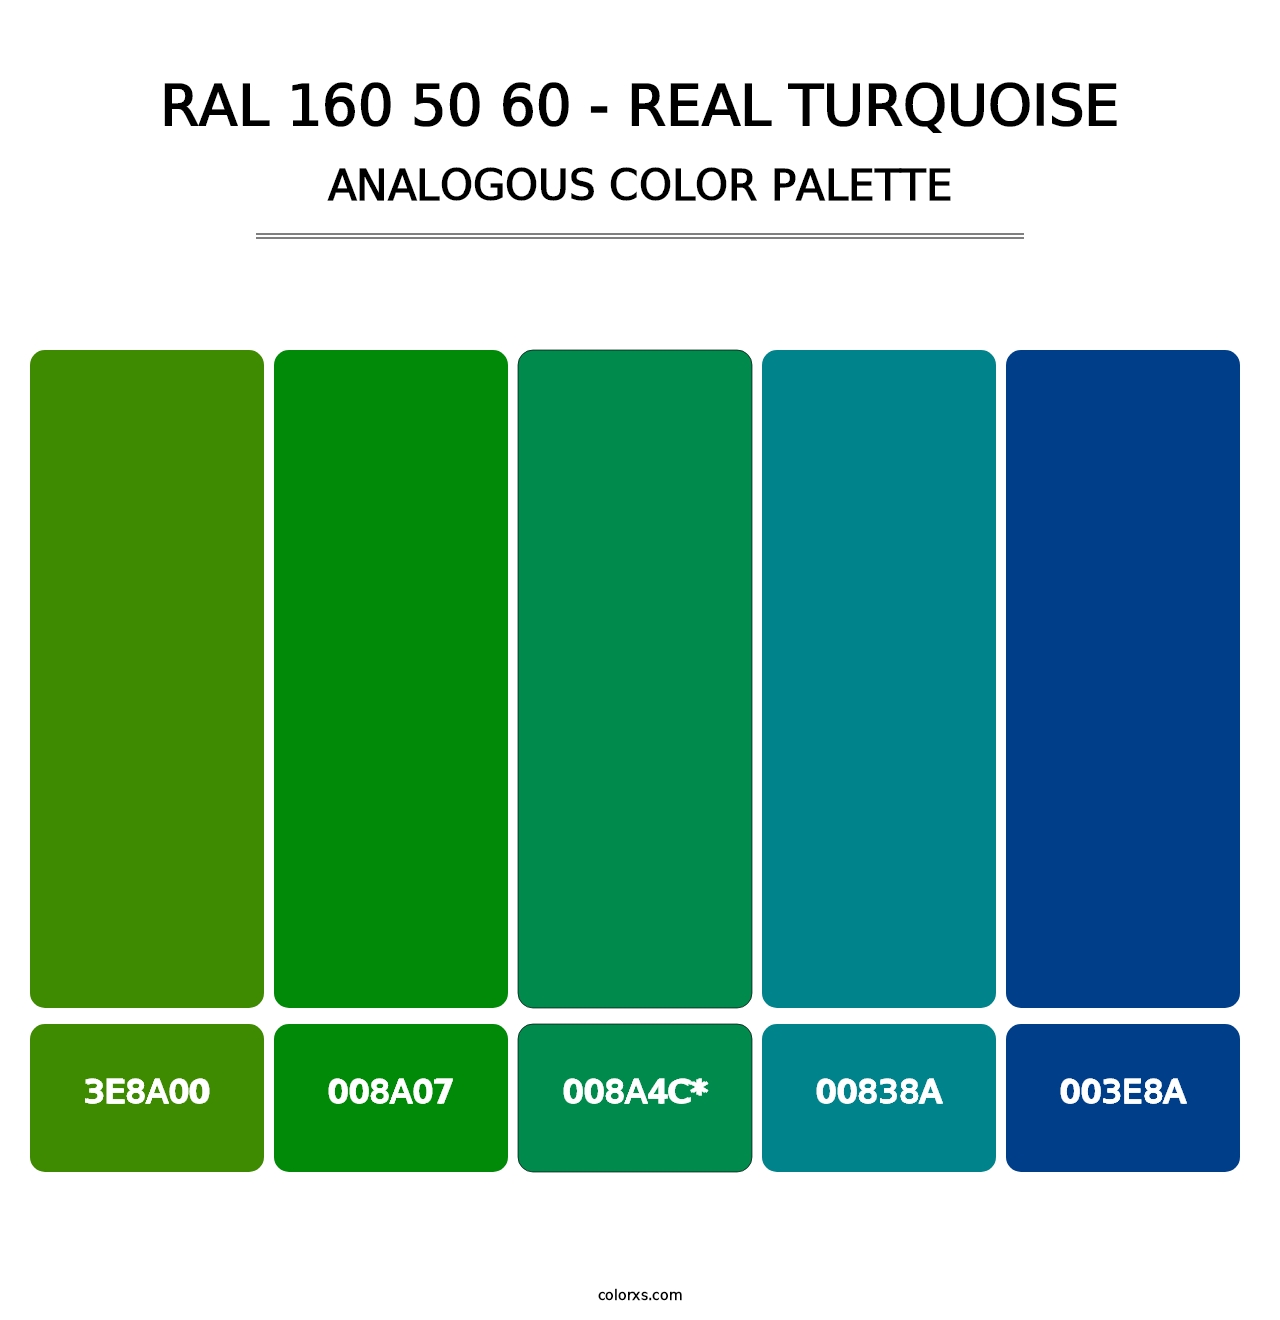 RAL 160 50 60 - Real Turquoise - Analogous Color Palette